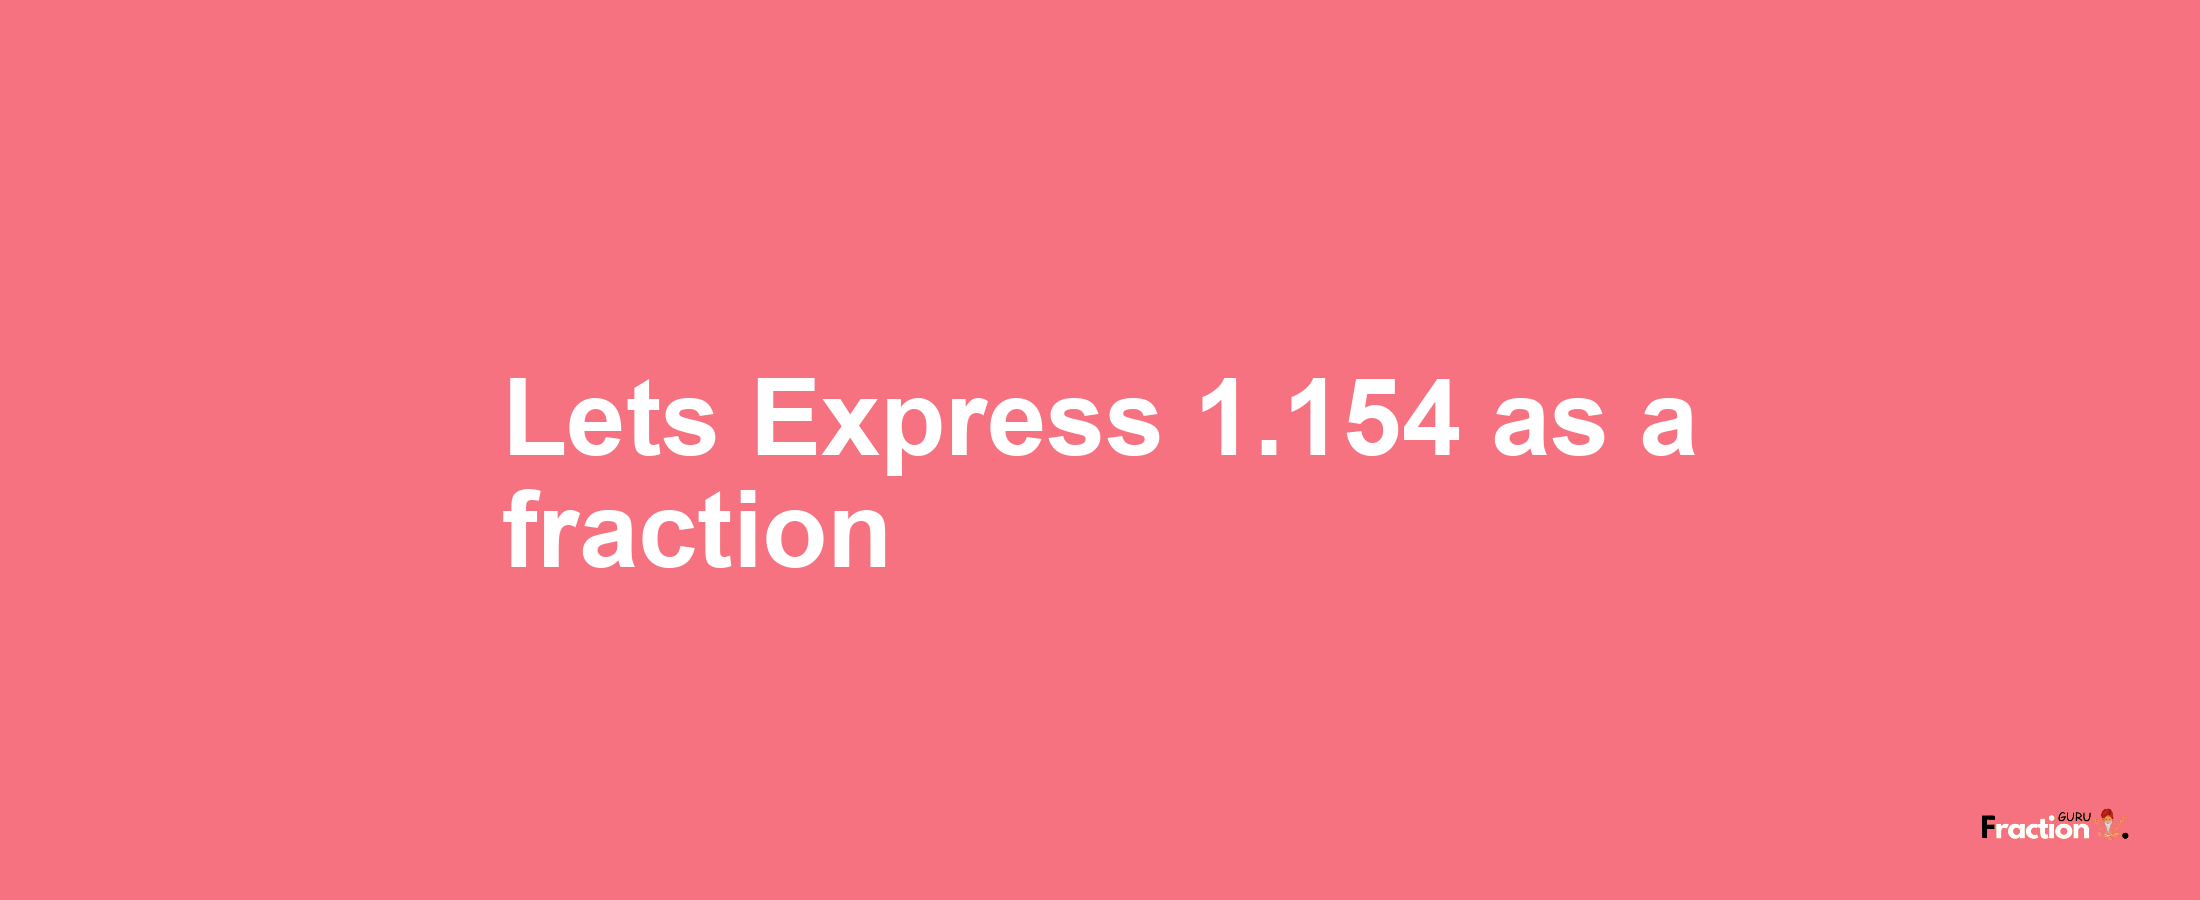 Lets Express 1.154 as afraction